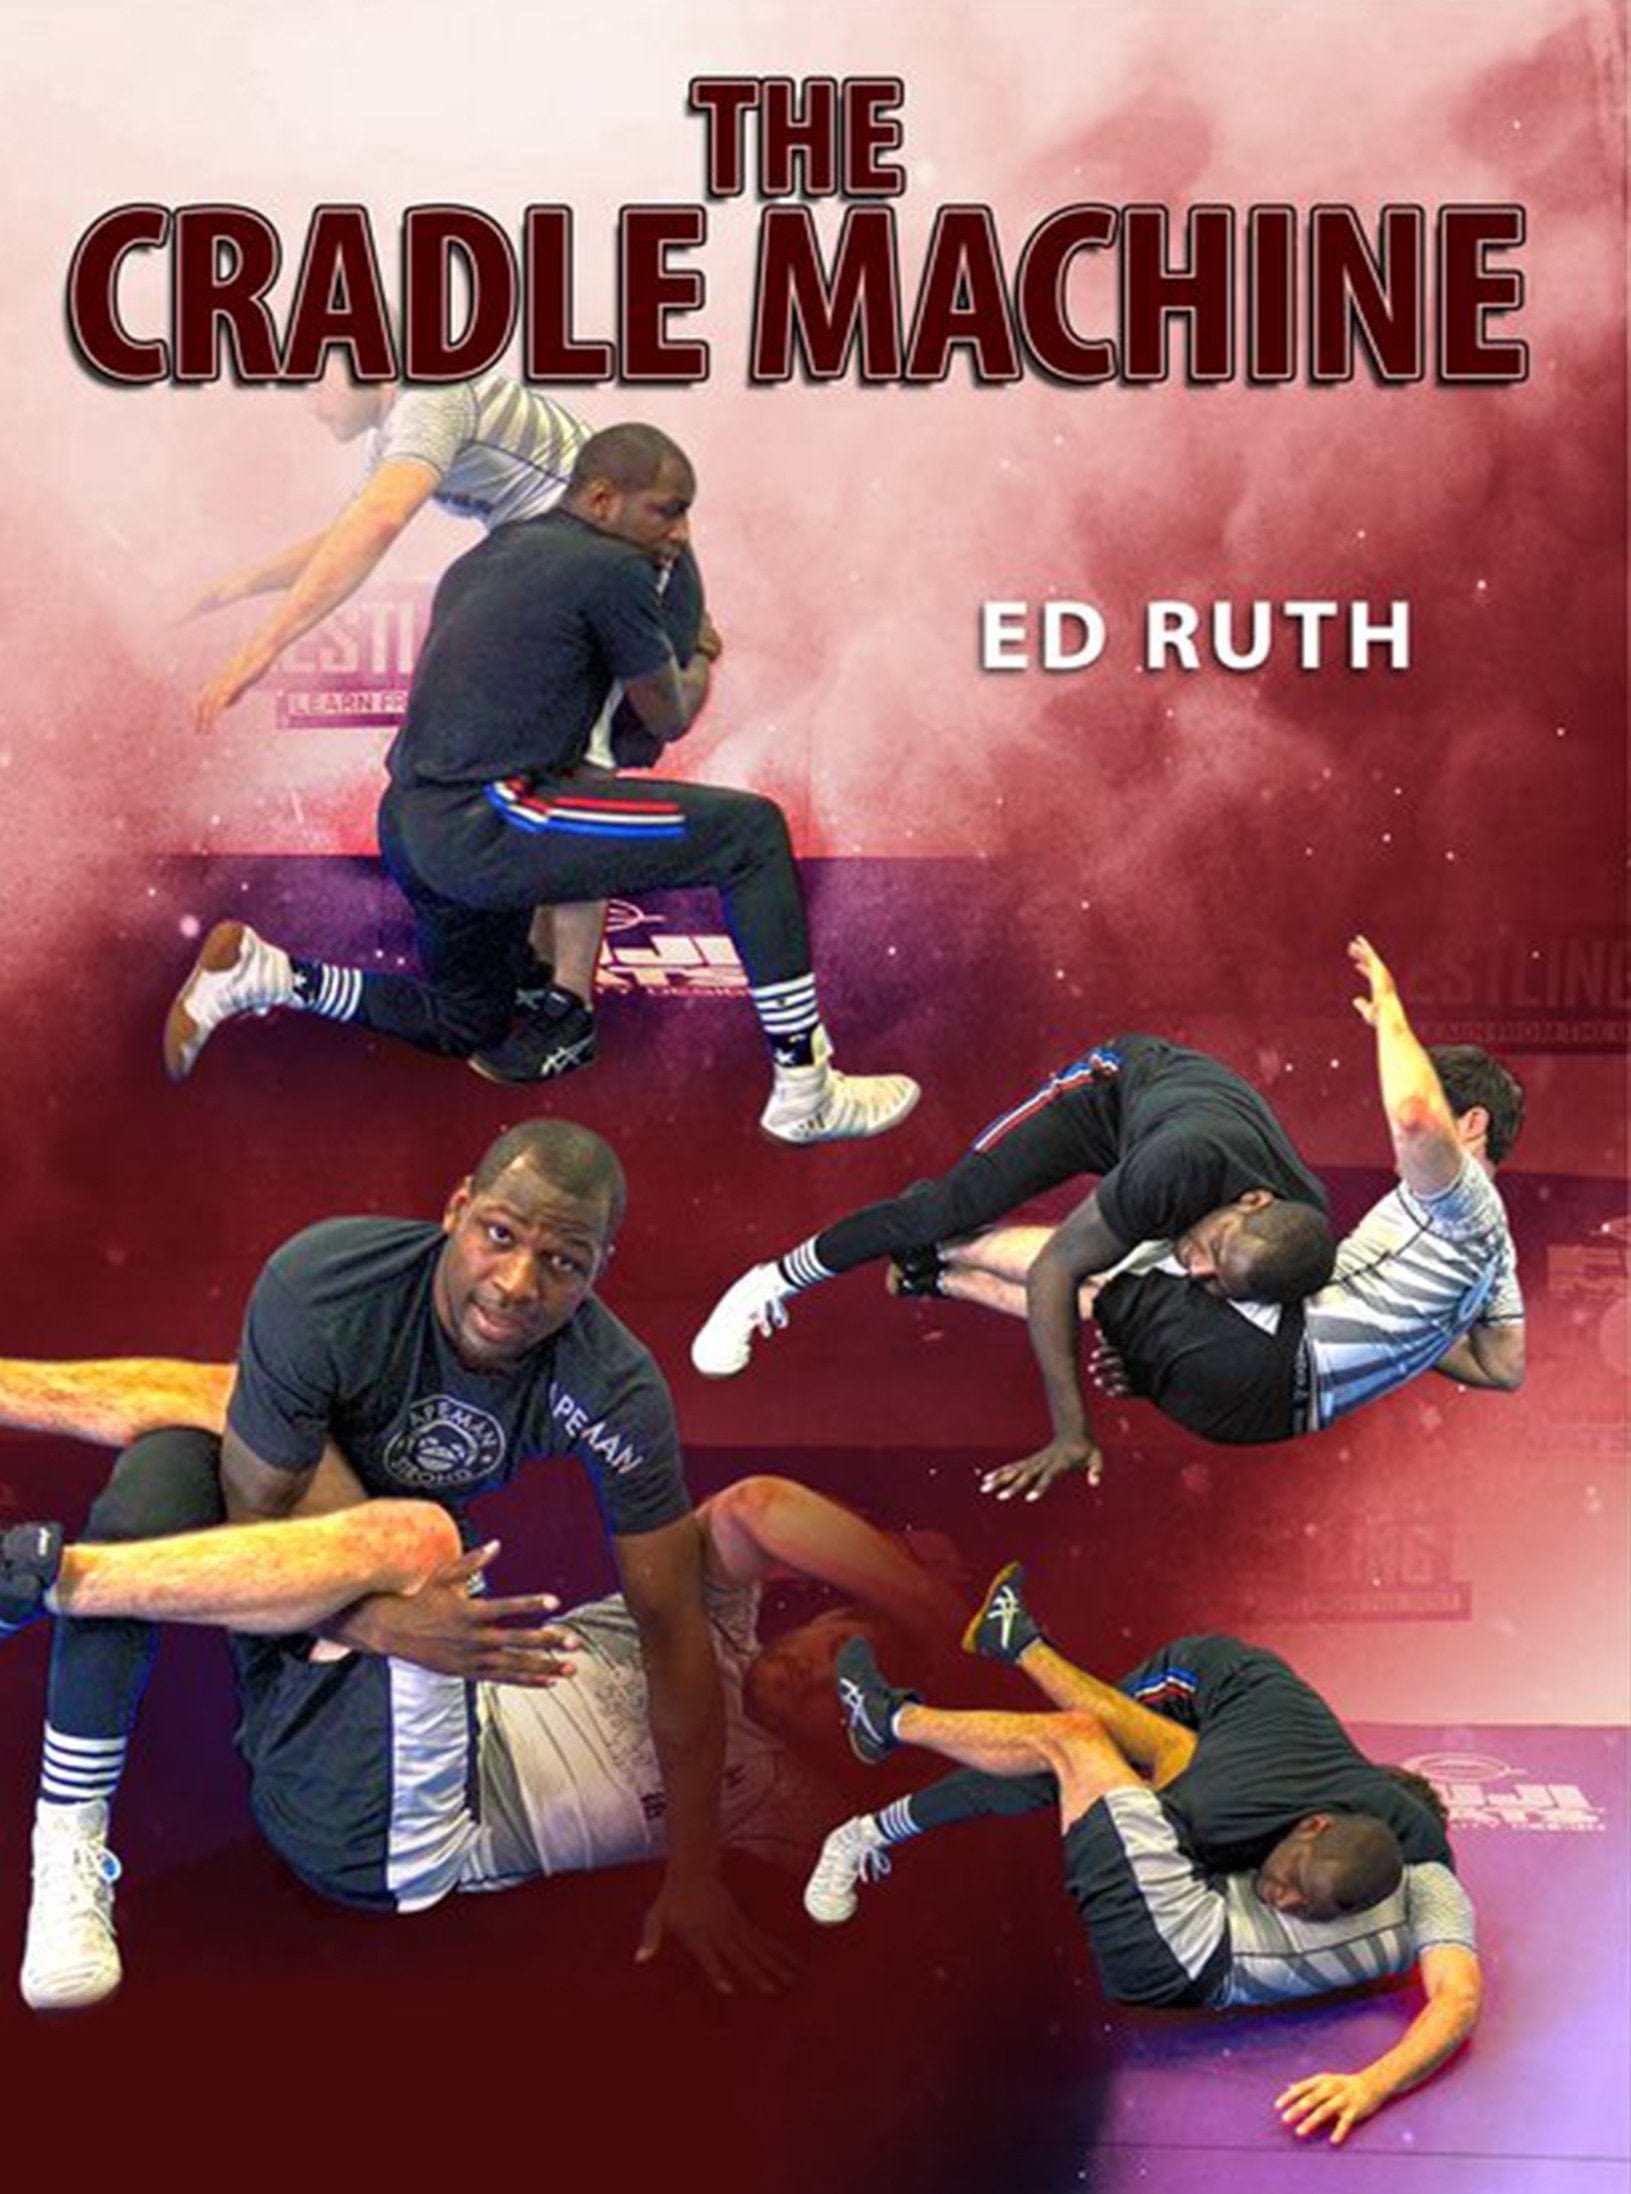 The Cradle Machine by Ed Ruth - Fanatic Wrestling